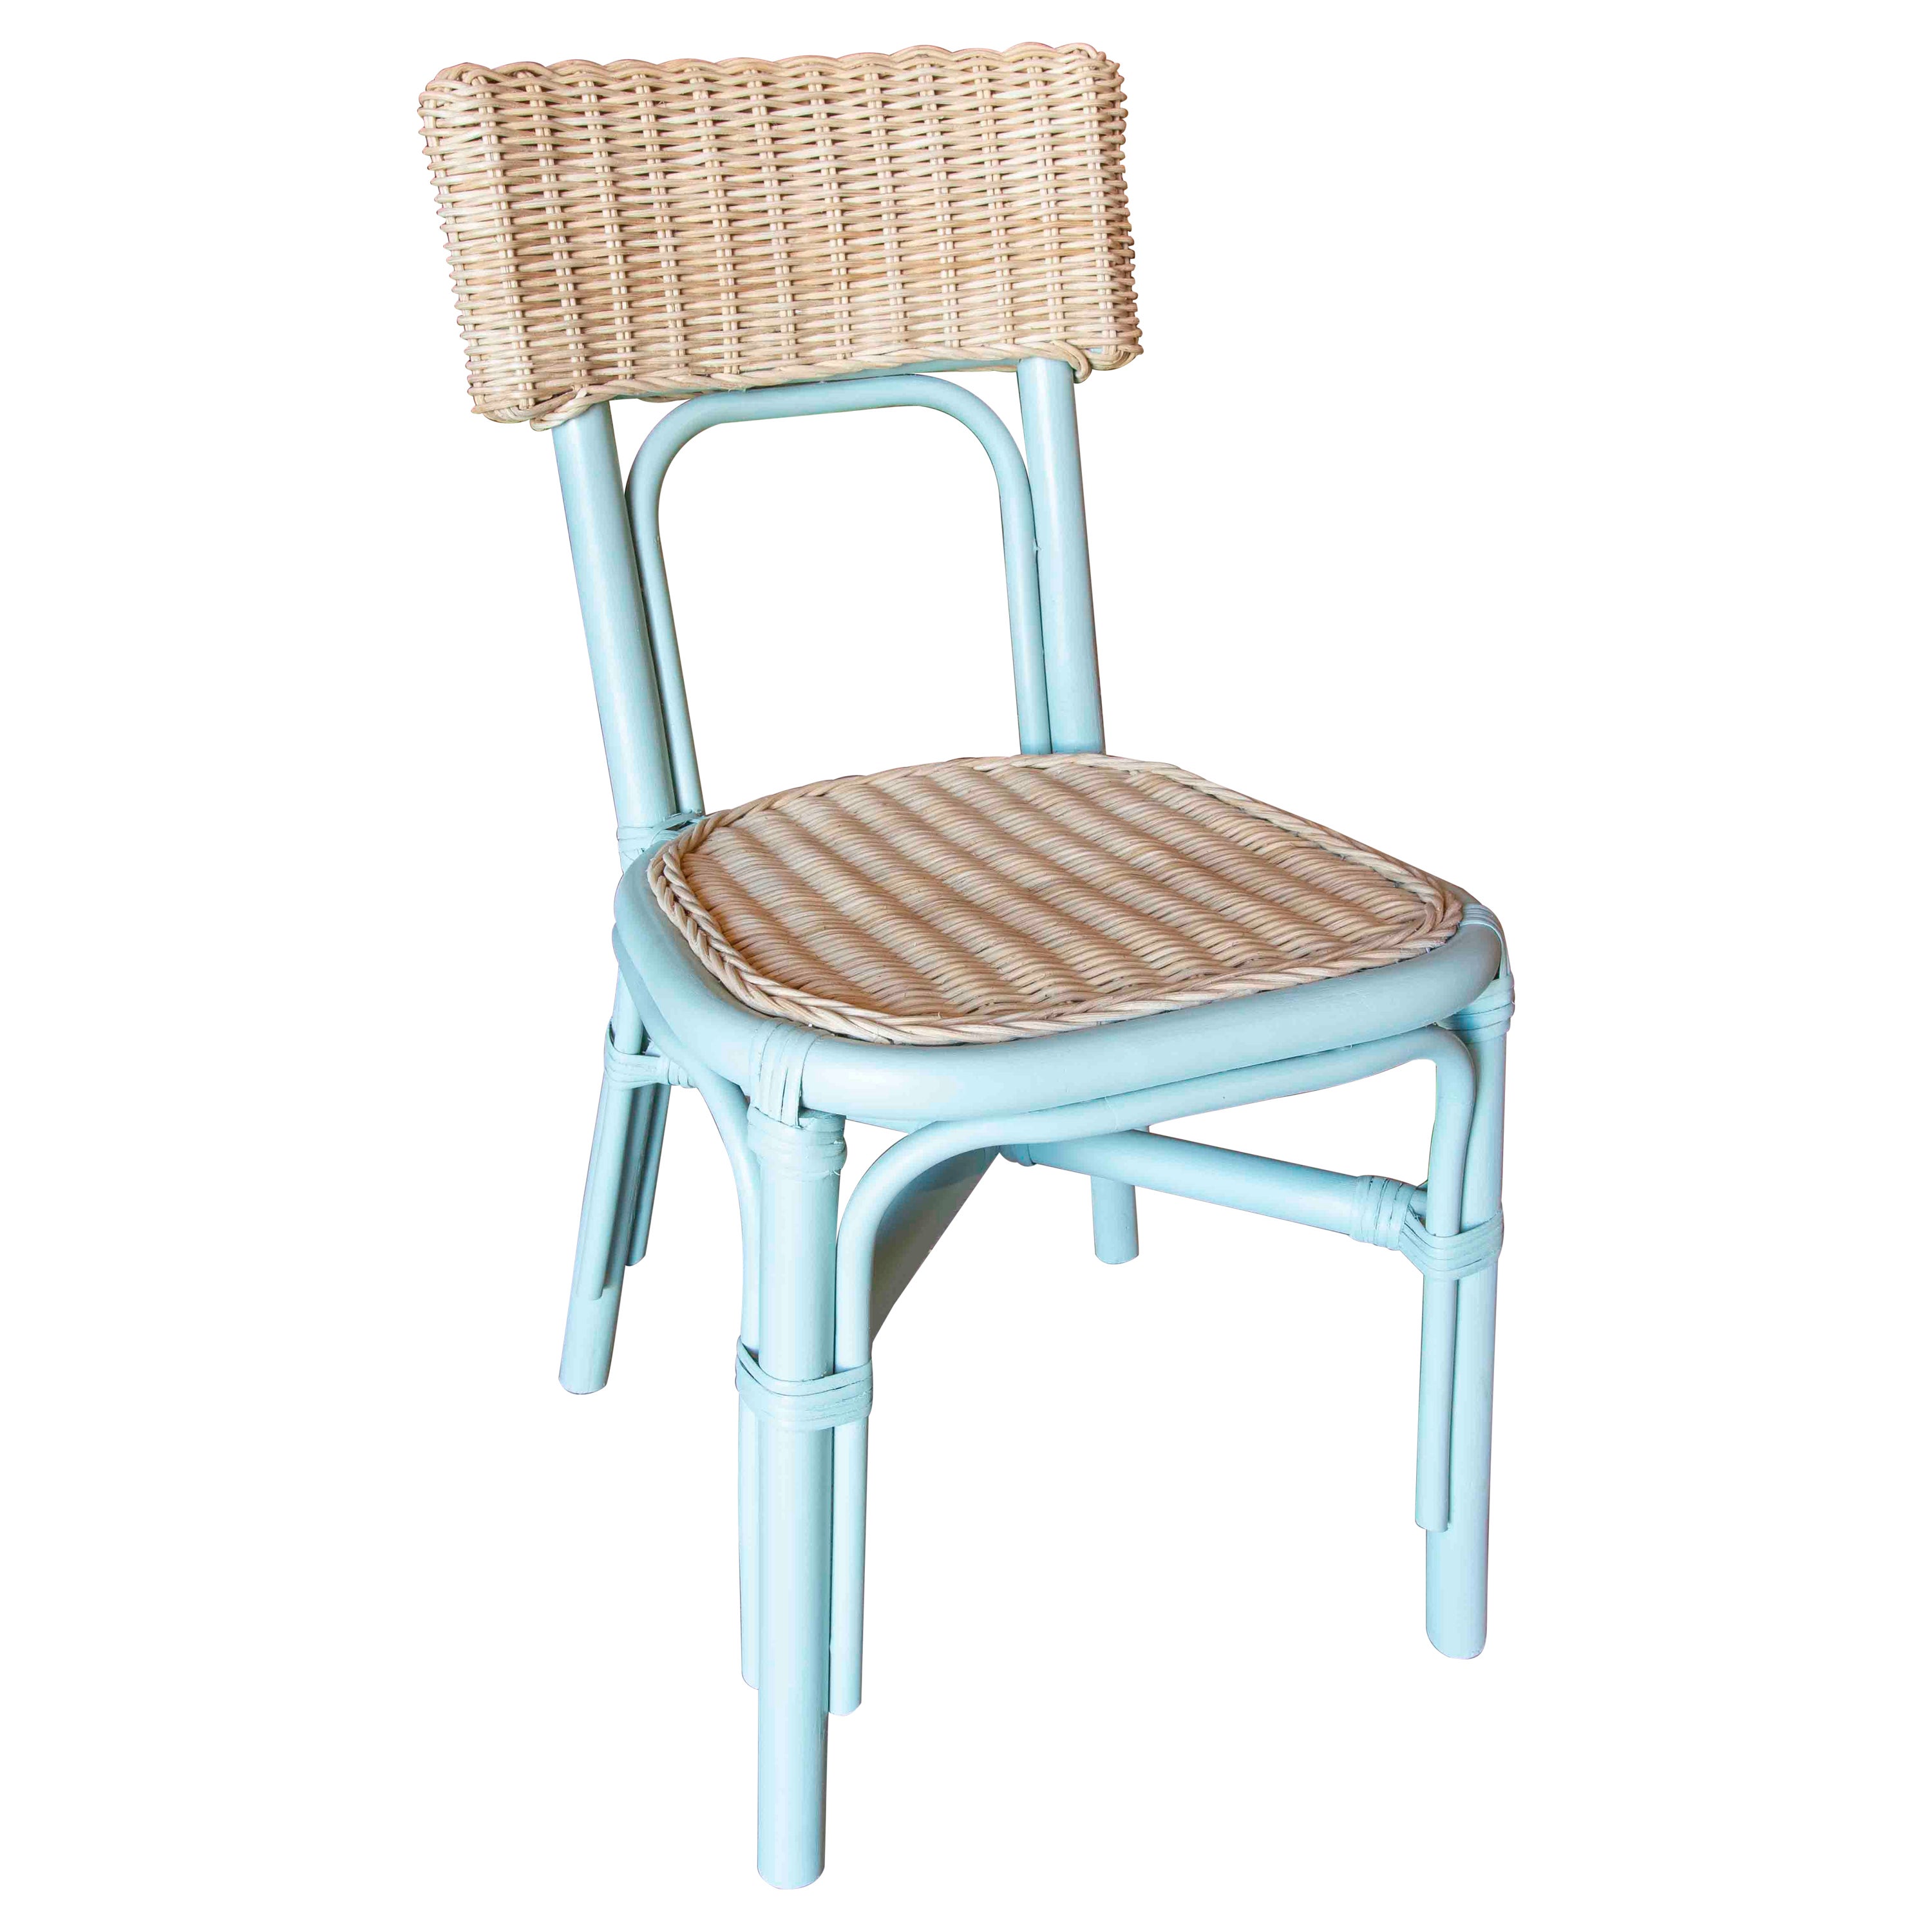 Handmade Wicker and Rattan Children's Chair in Natural Colour & Painted in Blue